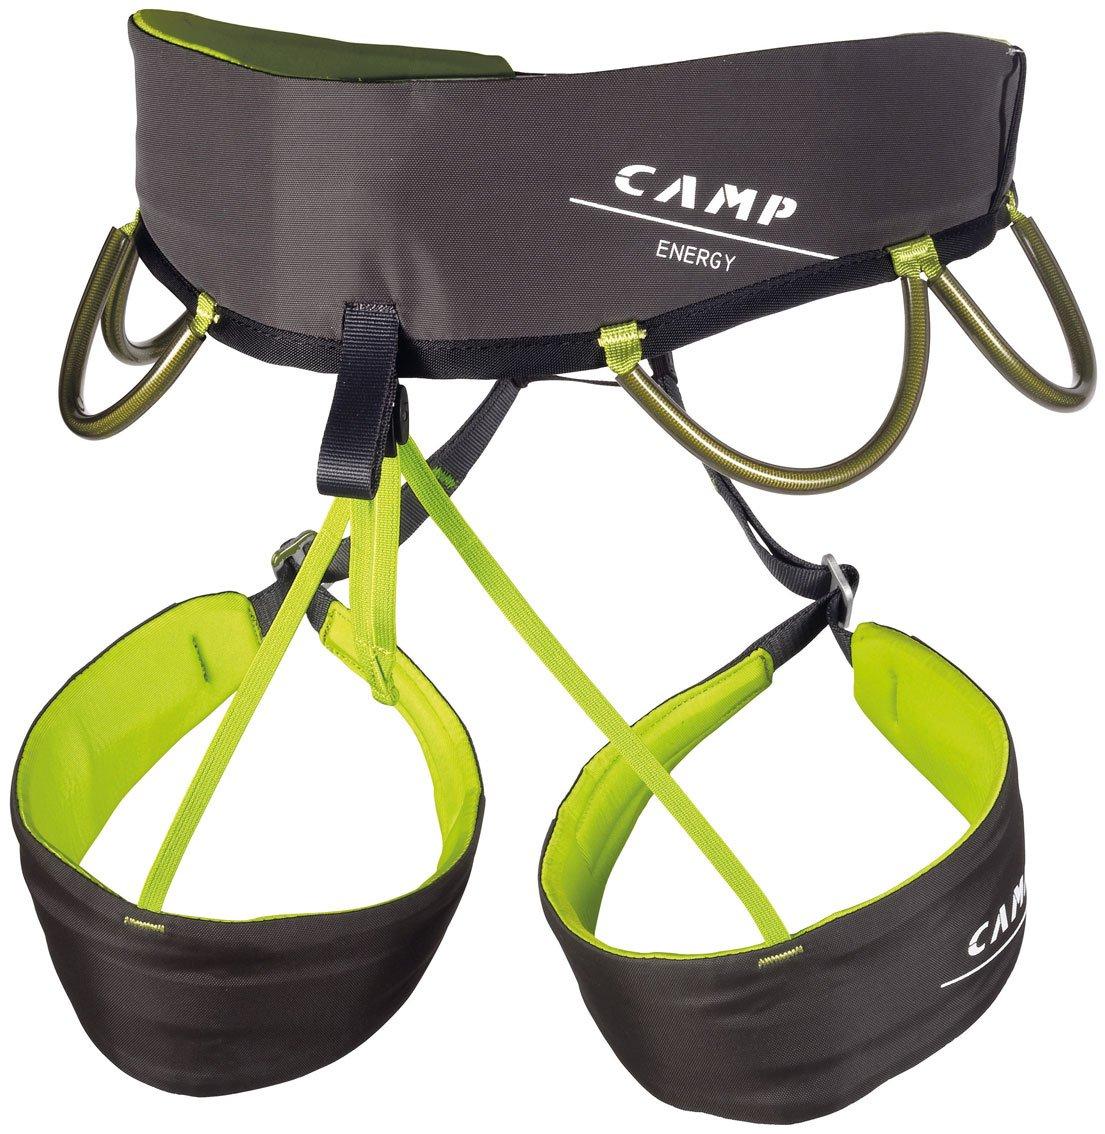 Camp Energy CR Climbing Harness Review